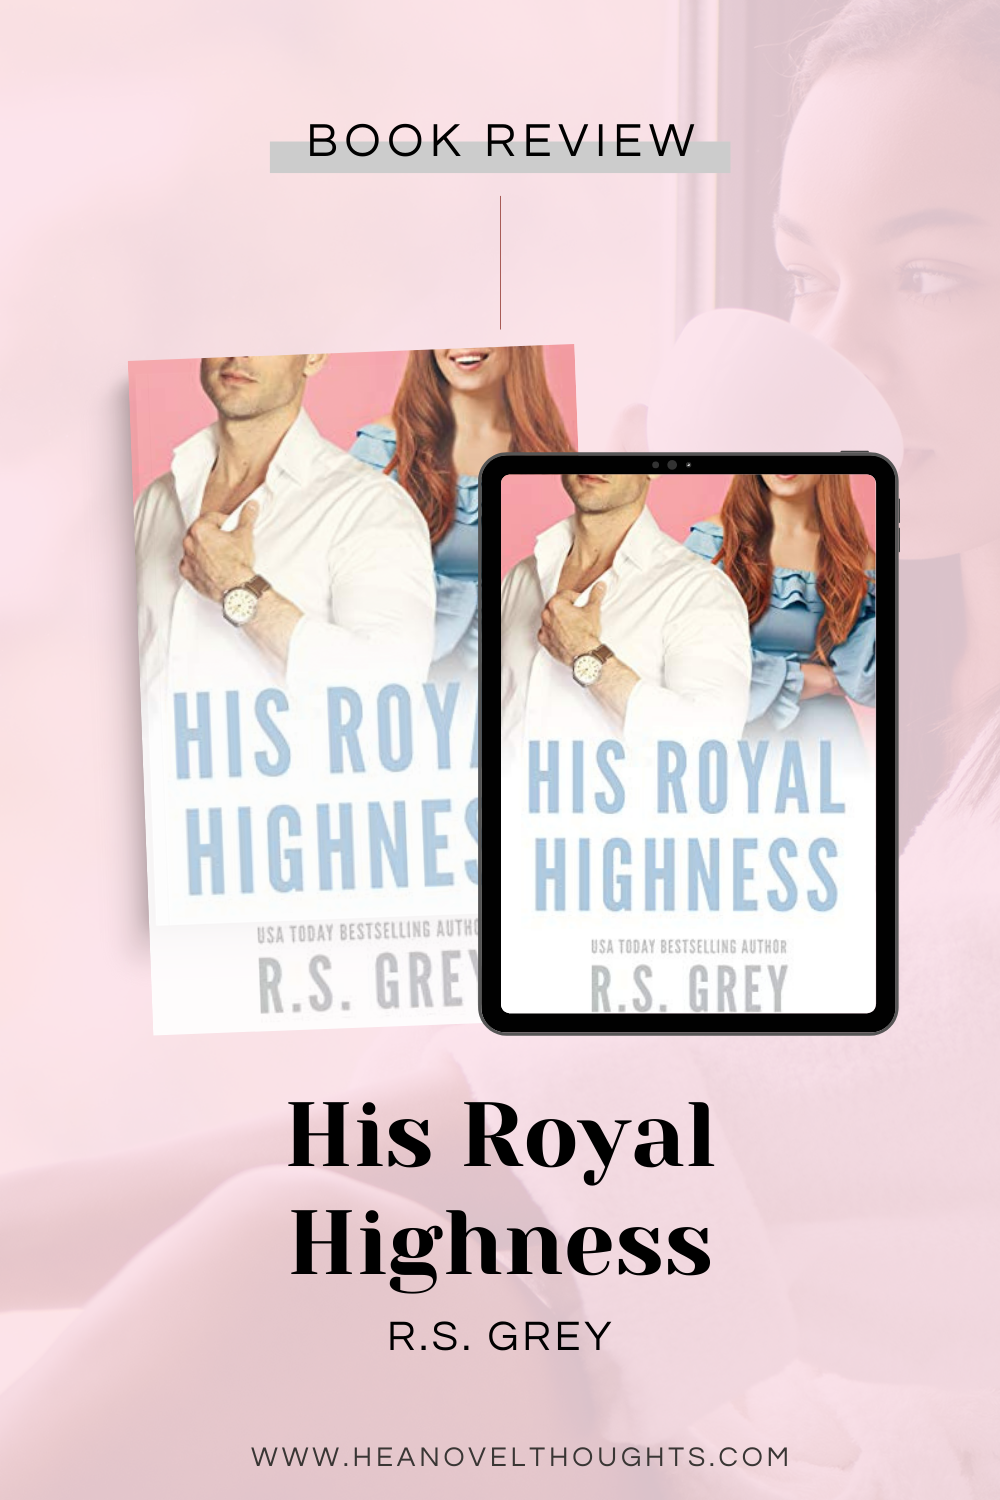 His Royal Highness by R.S. Grey